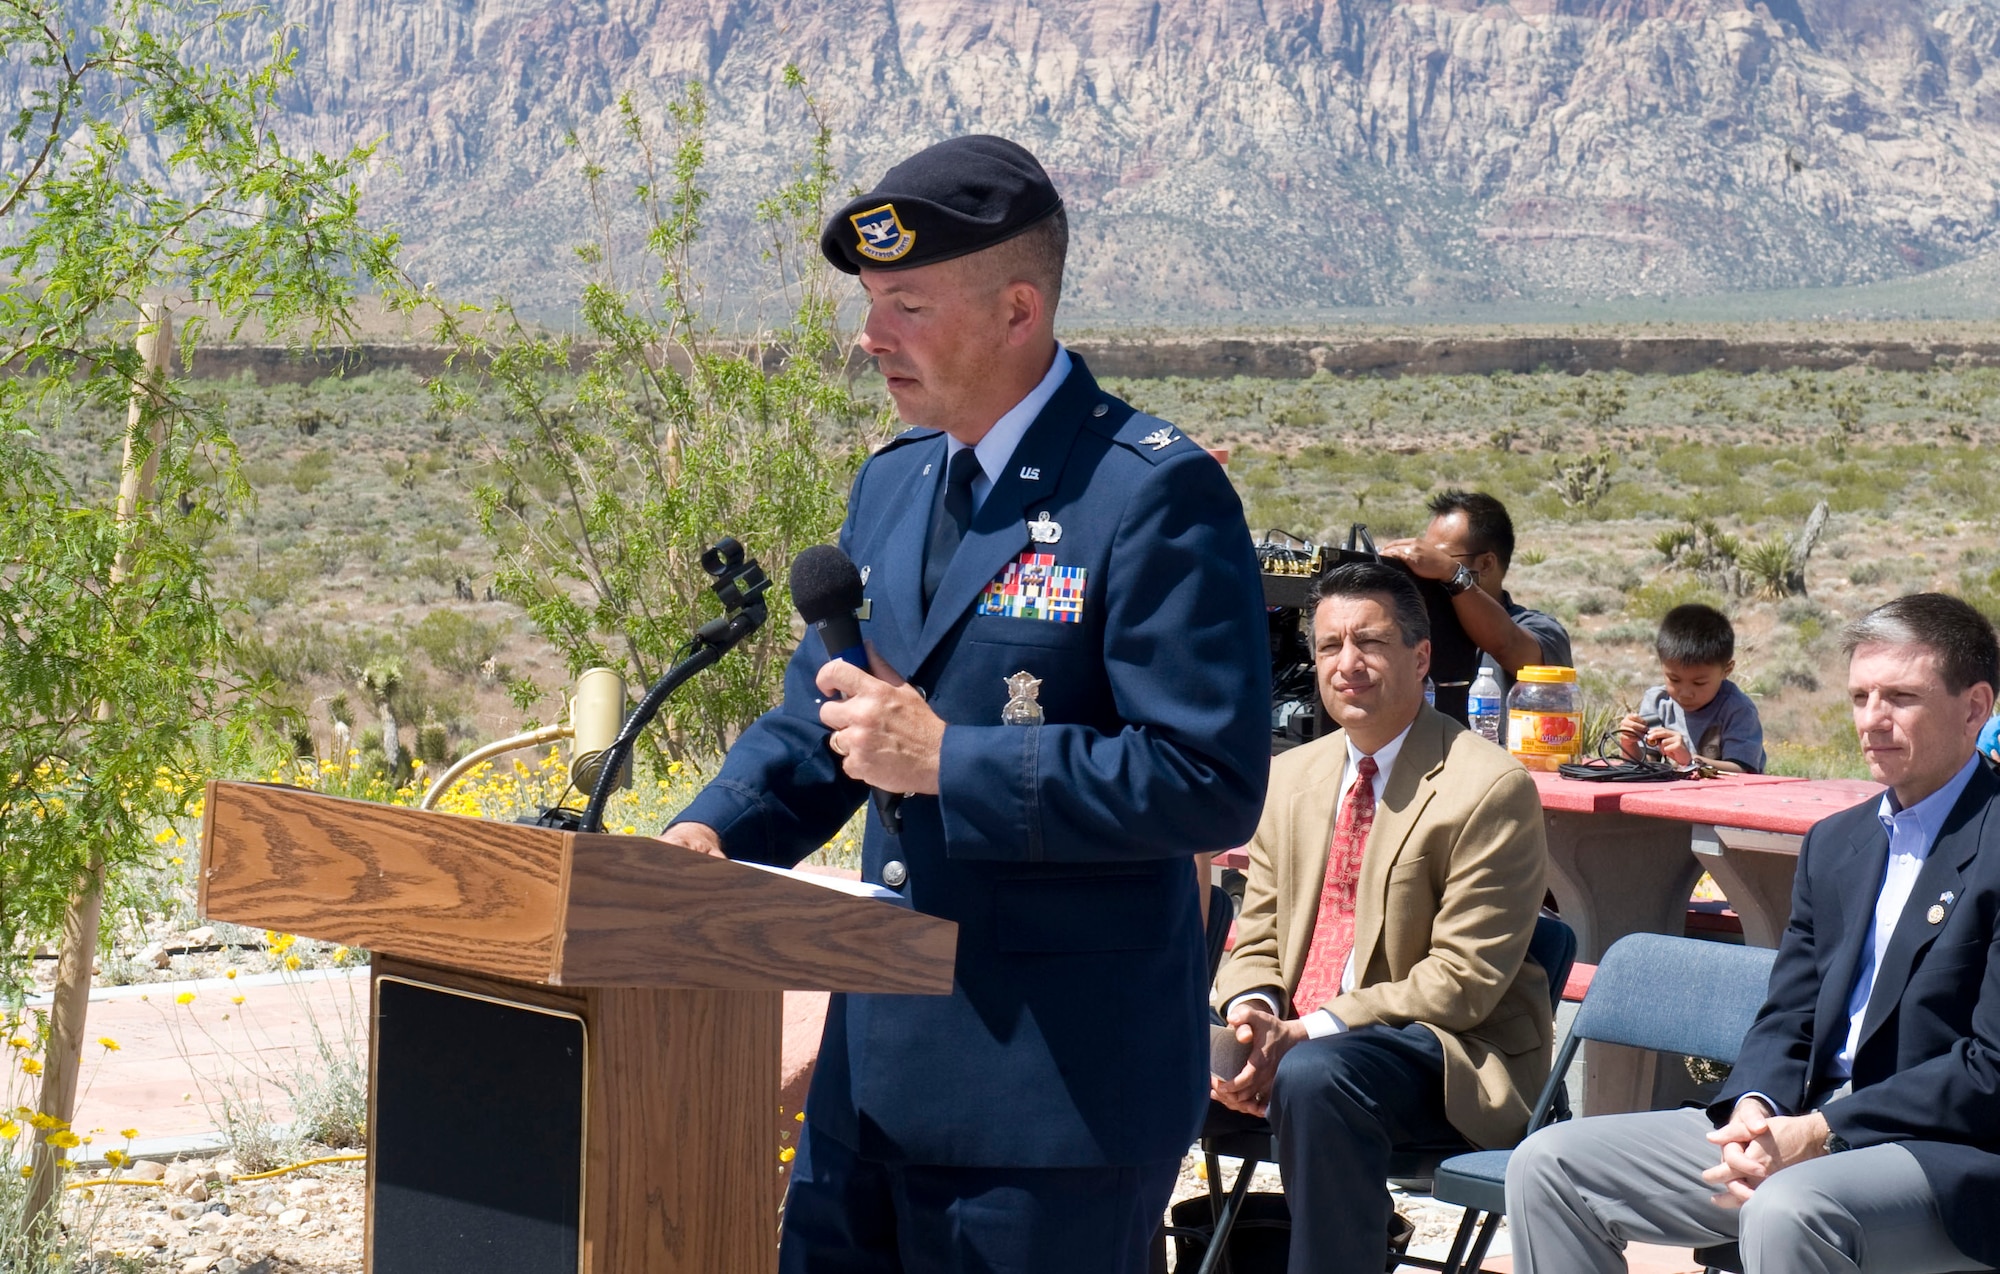 LAS VEGAS --Col. Kit Lambert, 99th Security Forces Group commander, speaks during the 6th annual Defending Freedom Memorial dedication ceremony at the Red Rock National Conservation Area May 14, 2011. Hosted annually, the event honors fallen servicemembers with ties to Nevada and provides a forum for the community to express its appreciation for this sacrifice. The Defending Freedom Memorial was initially dedicated in 2005 and is comprised of seven sandstones with the engraved names of Nevada's fallen servicemen and women. This year, the names Nellis Airmen Senior Airman Michael Buras, Staff Sgt. David Smith, 1st Lt. Joel Gentz and Capt. David Wisniewski were added to the memorial. All four Airmen were lost in 2010 while supporting operations in Afghanistan.  (U.S. Air Force photo by Airman 1st Class Jamie L. Nicley)
